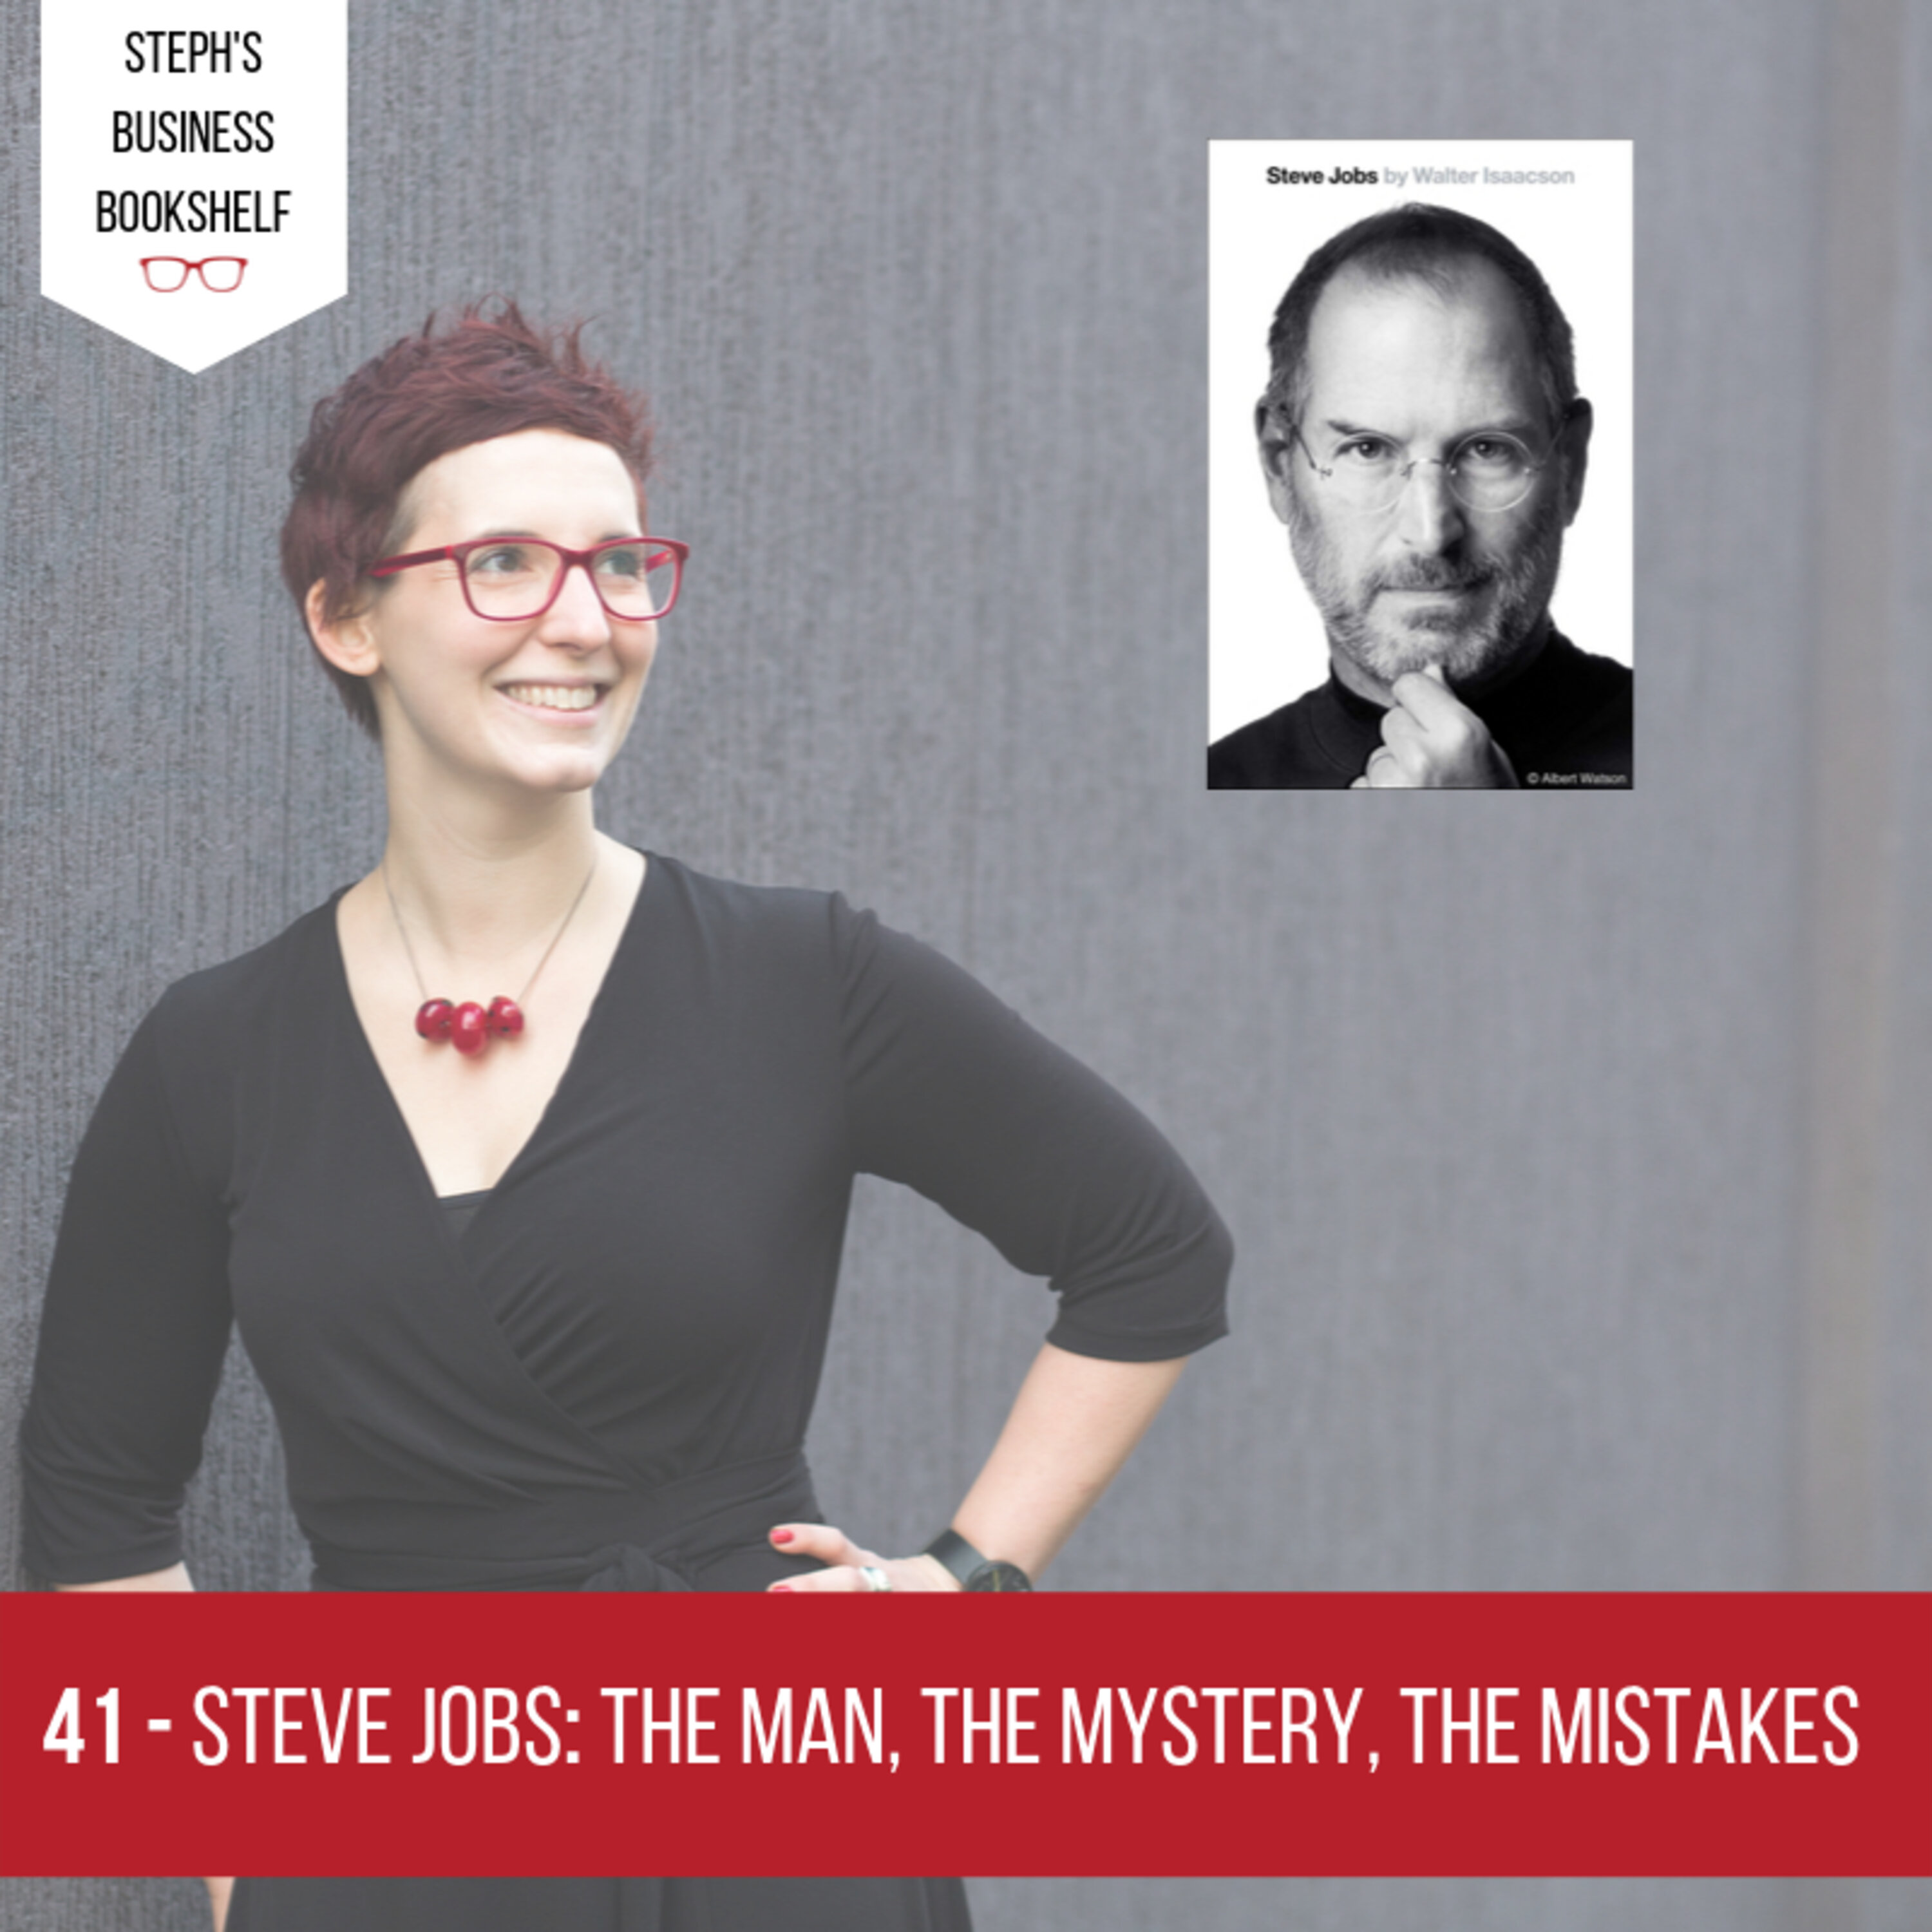 Steve Jobs by Walter Isaacson: The man, the mystery, the mistakes